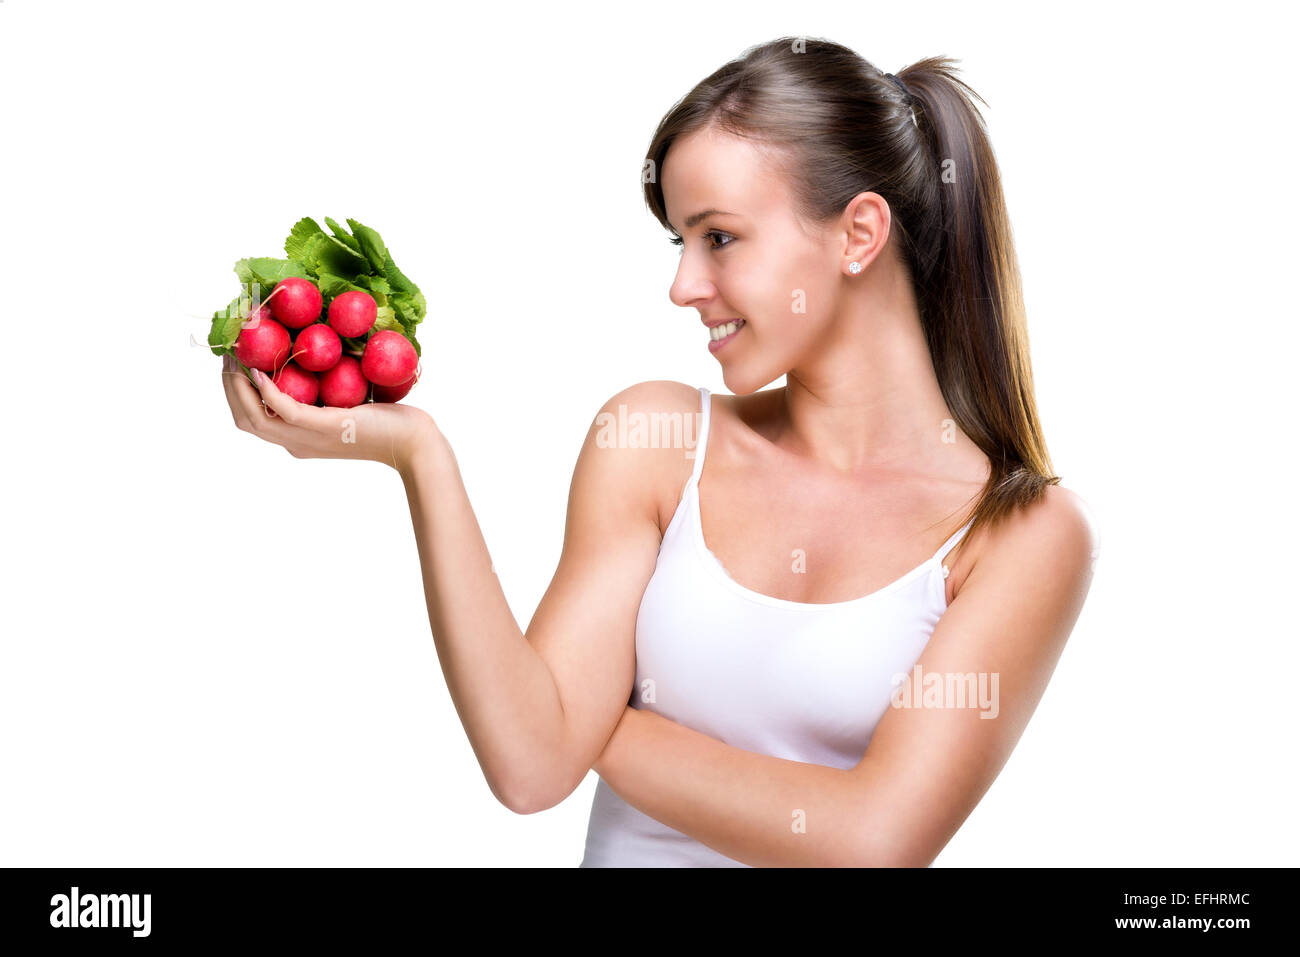 Long live healthily, eating good foods Stock Photo